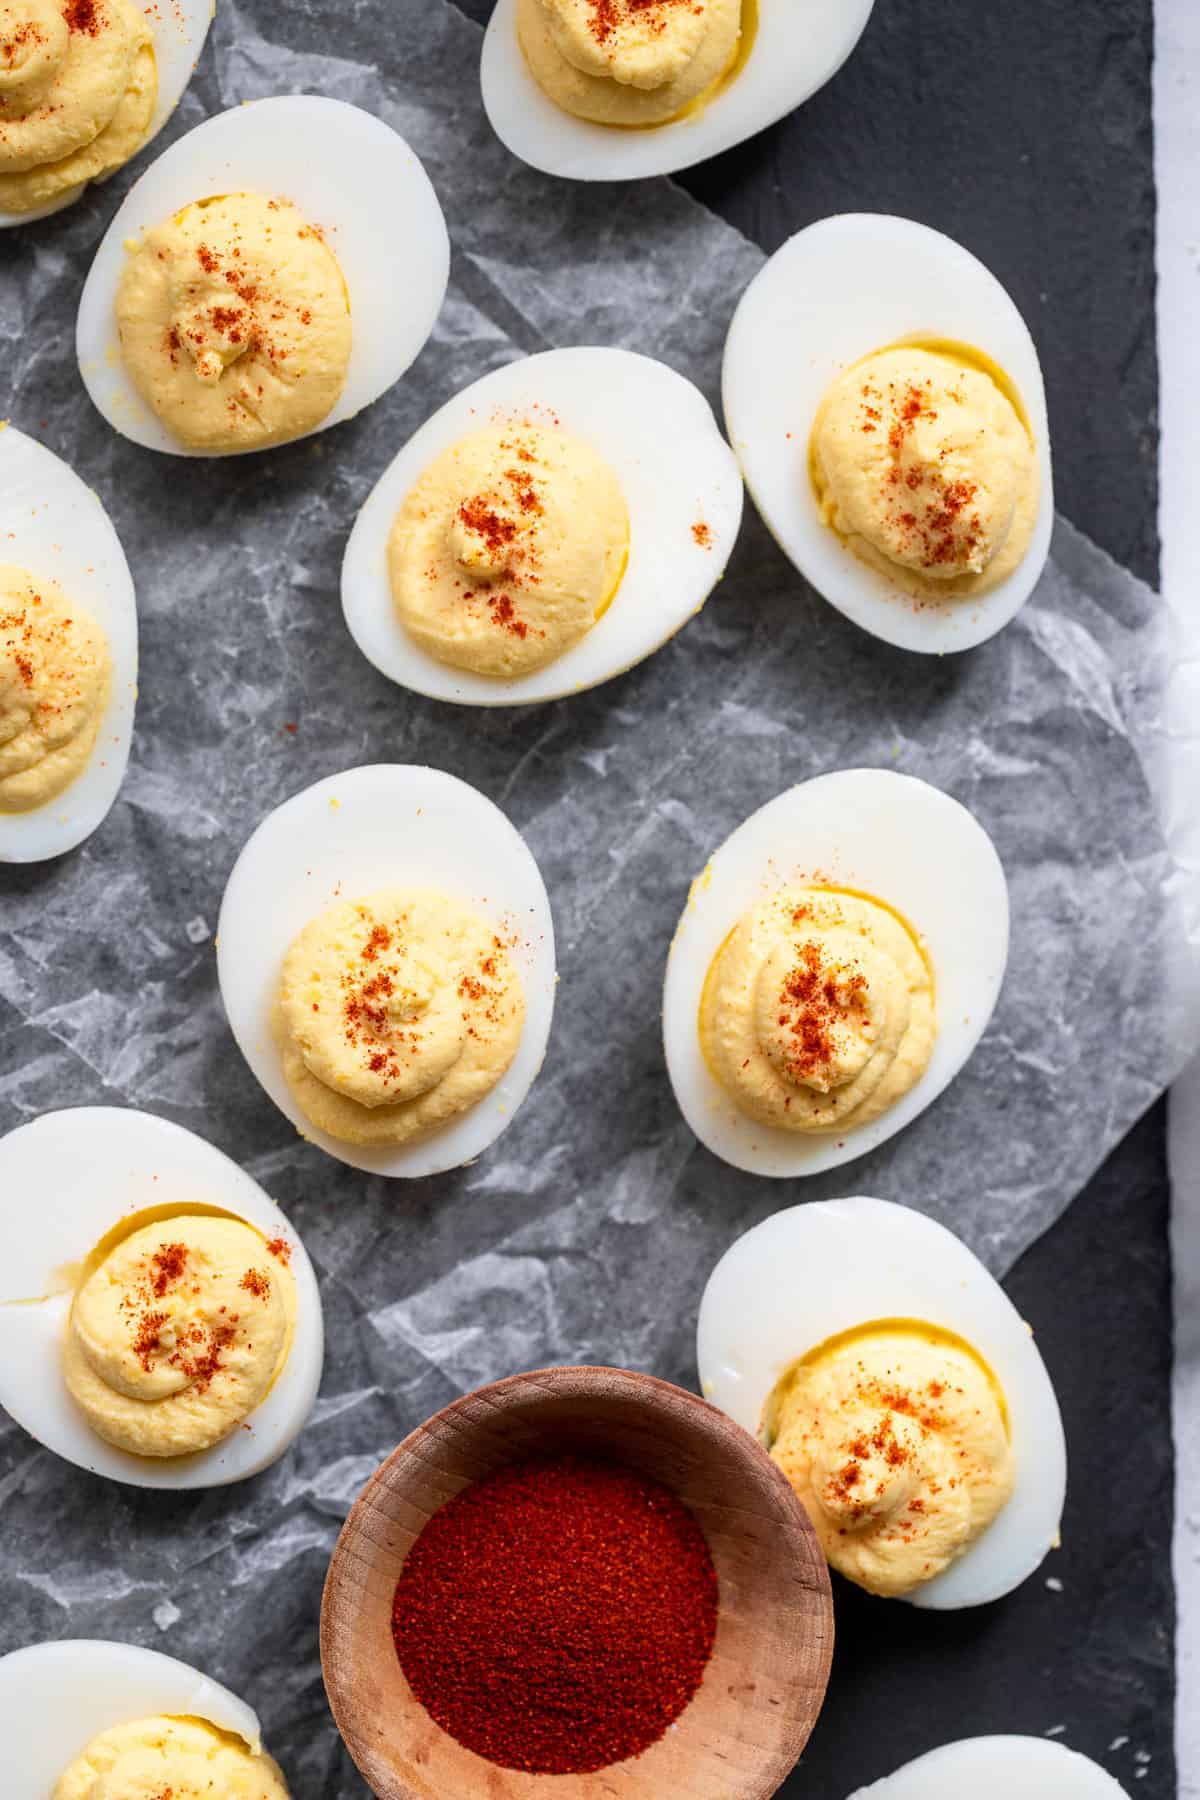  deviled eggs without mayo close up of eggs